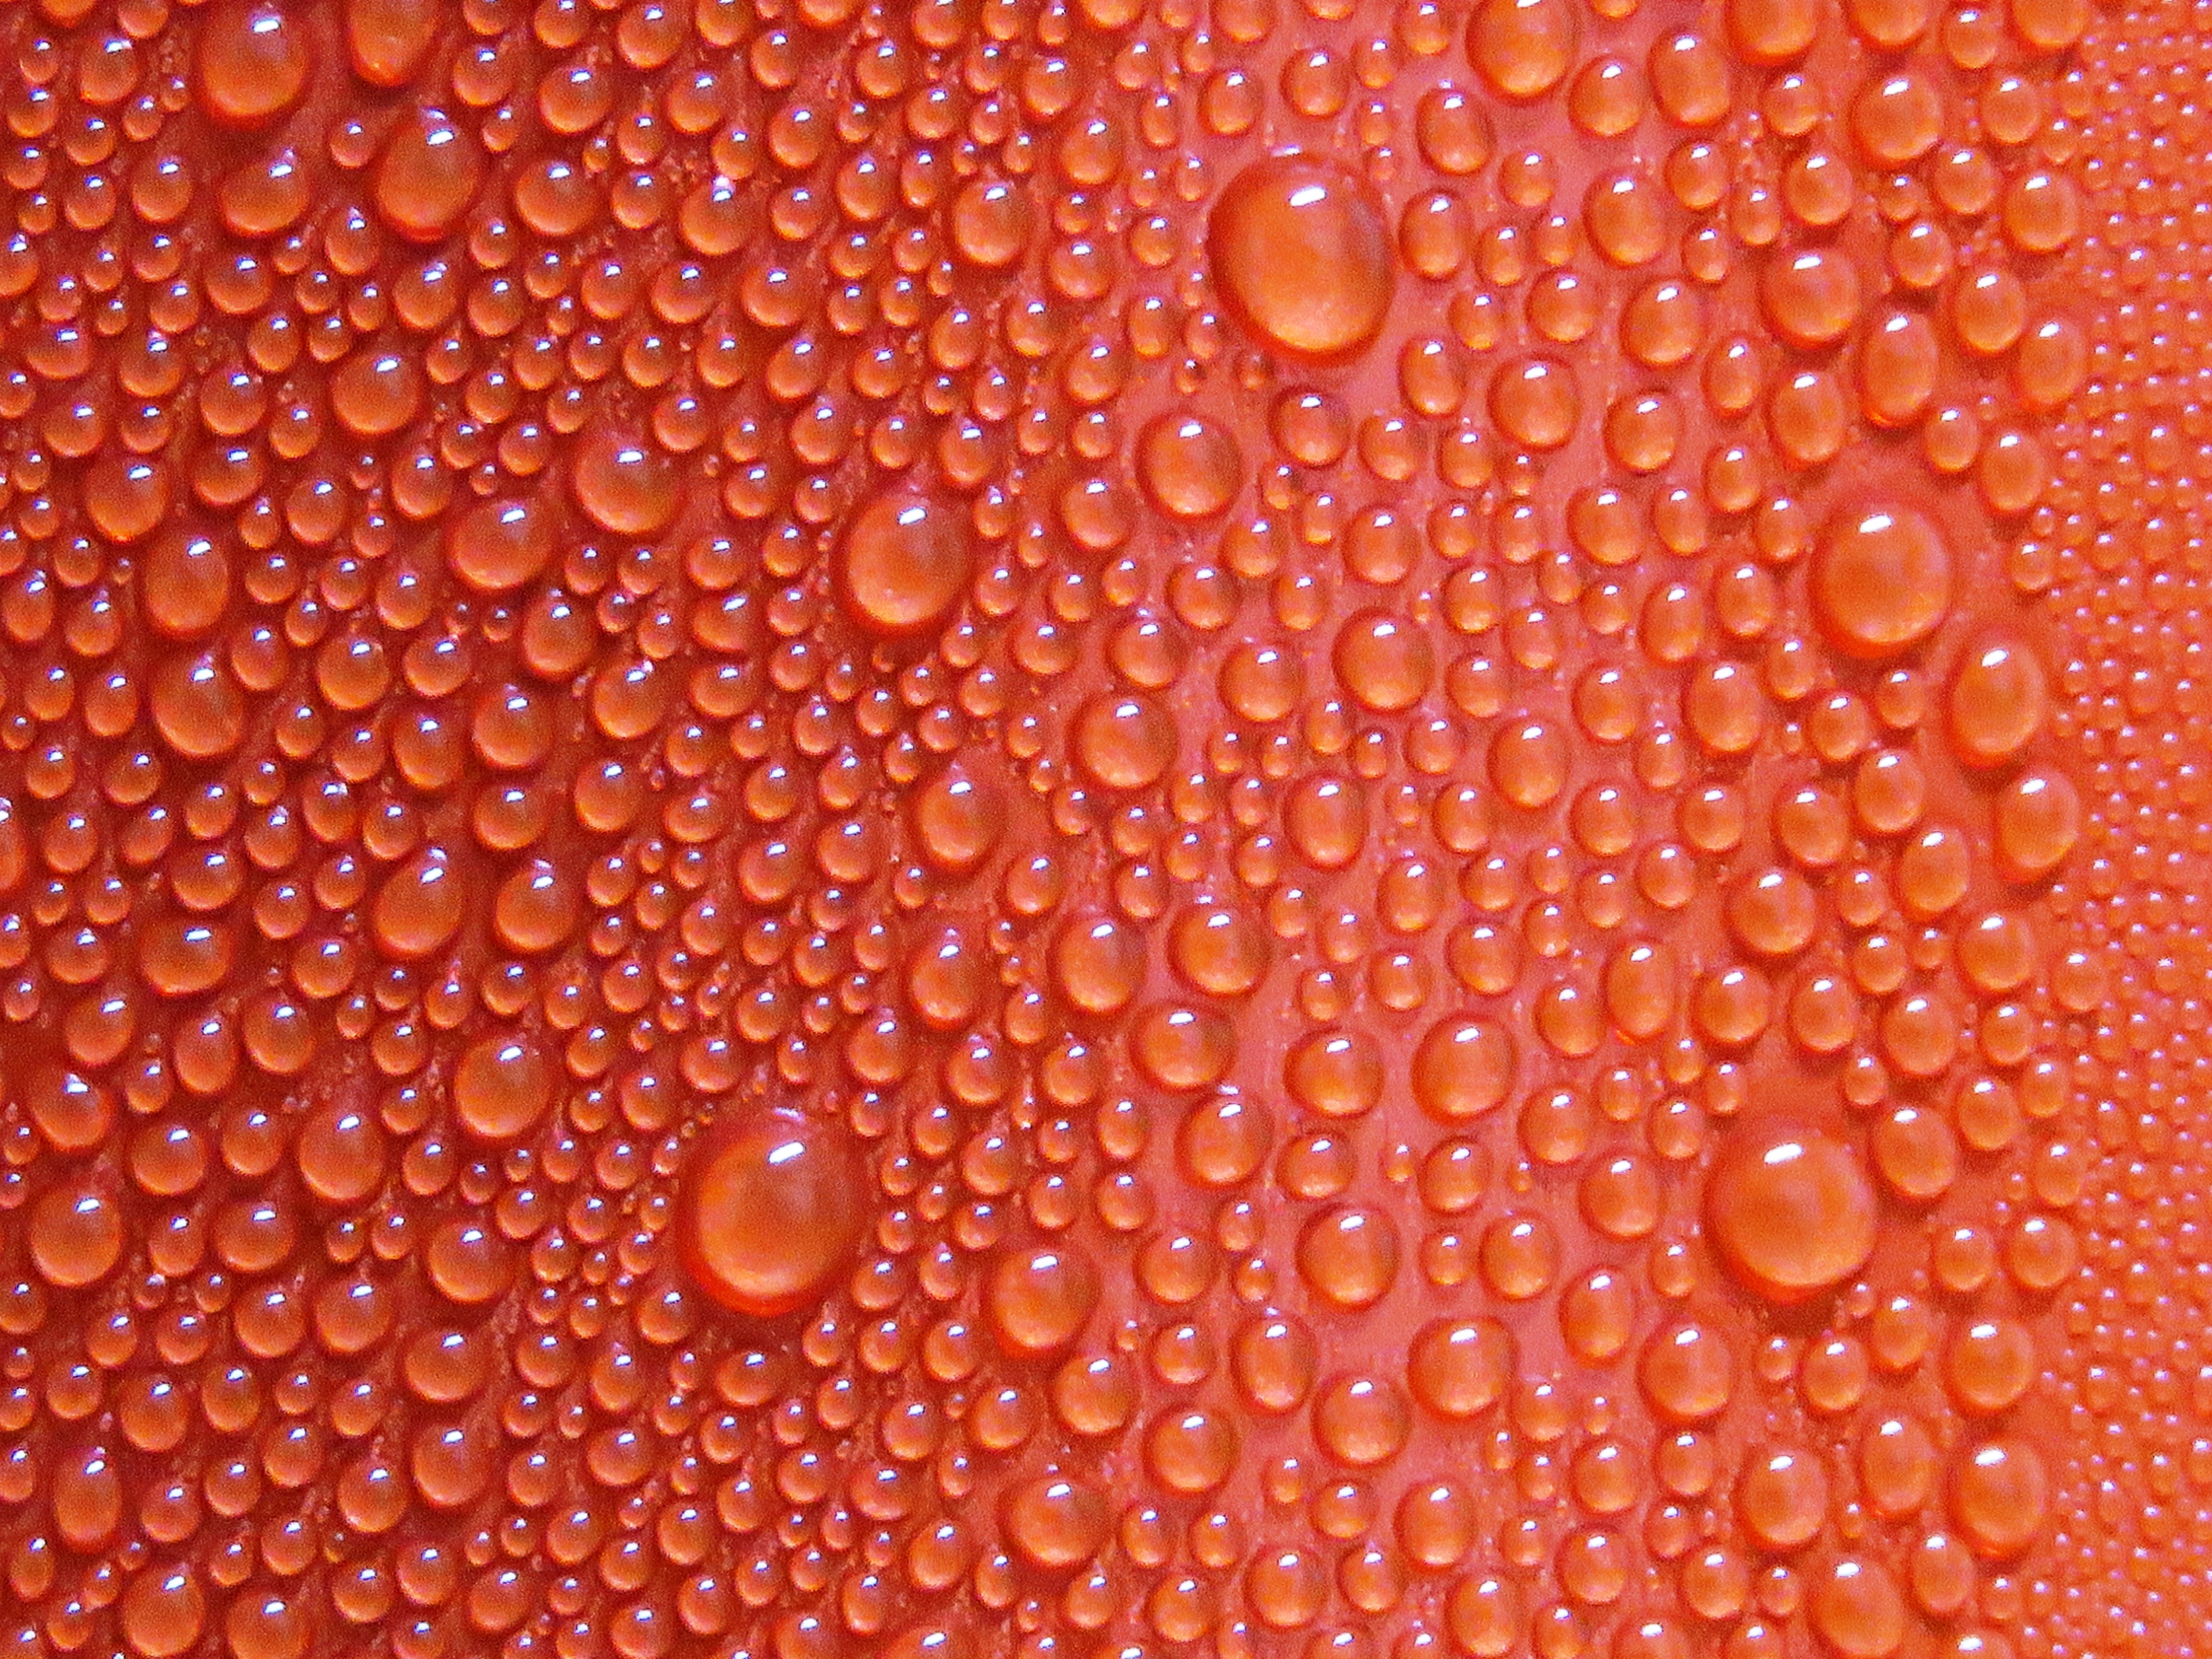 drops, texture, textures, surface lock screen backgrounds